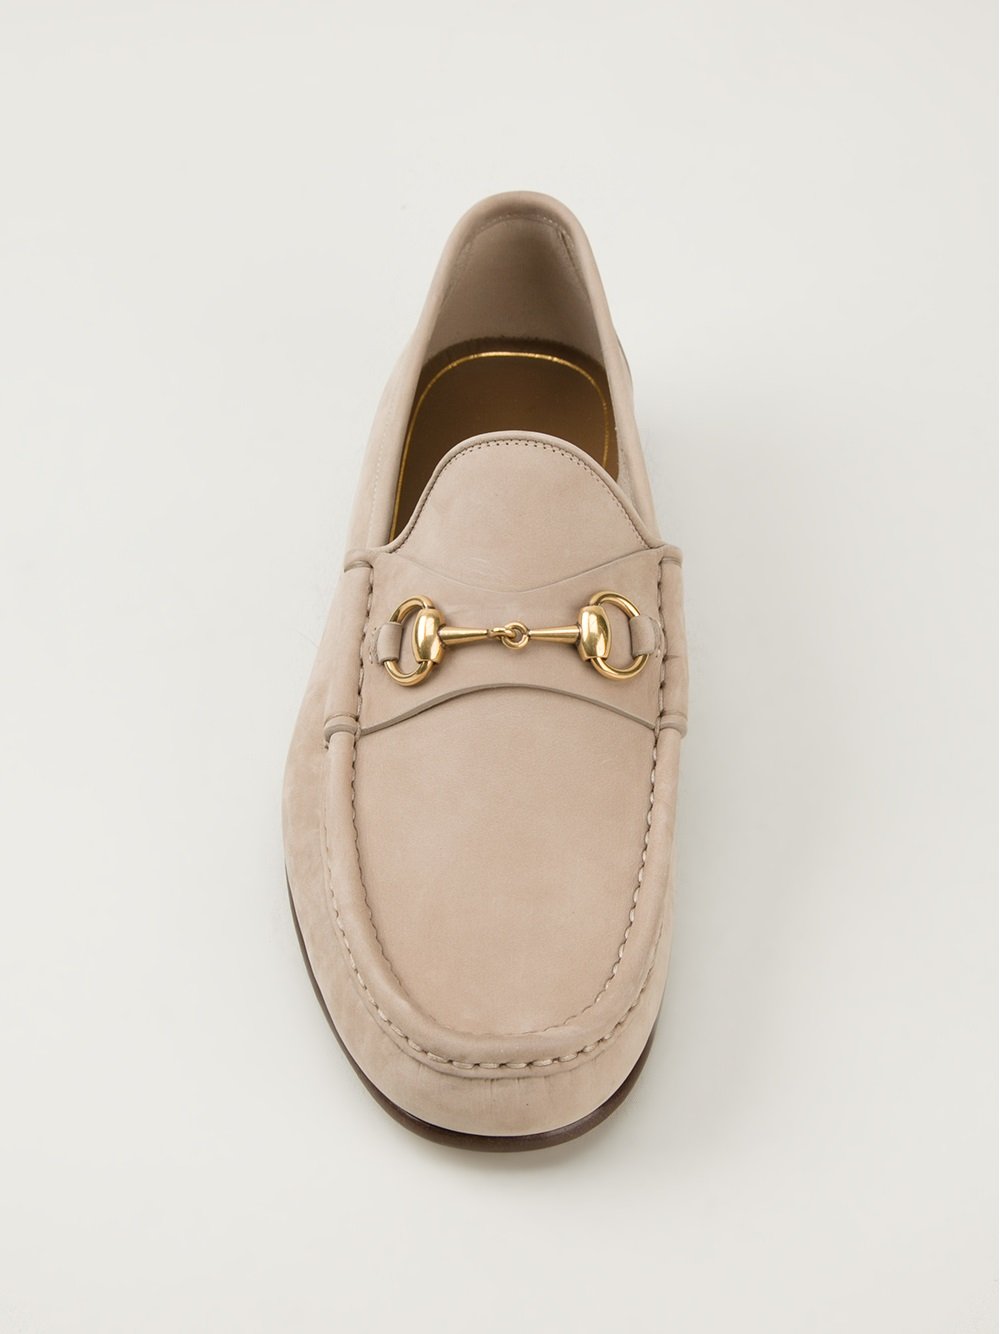 Lyst - Gucci Driving Loafers in Natural for Men